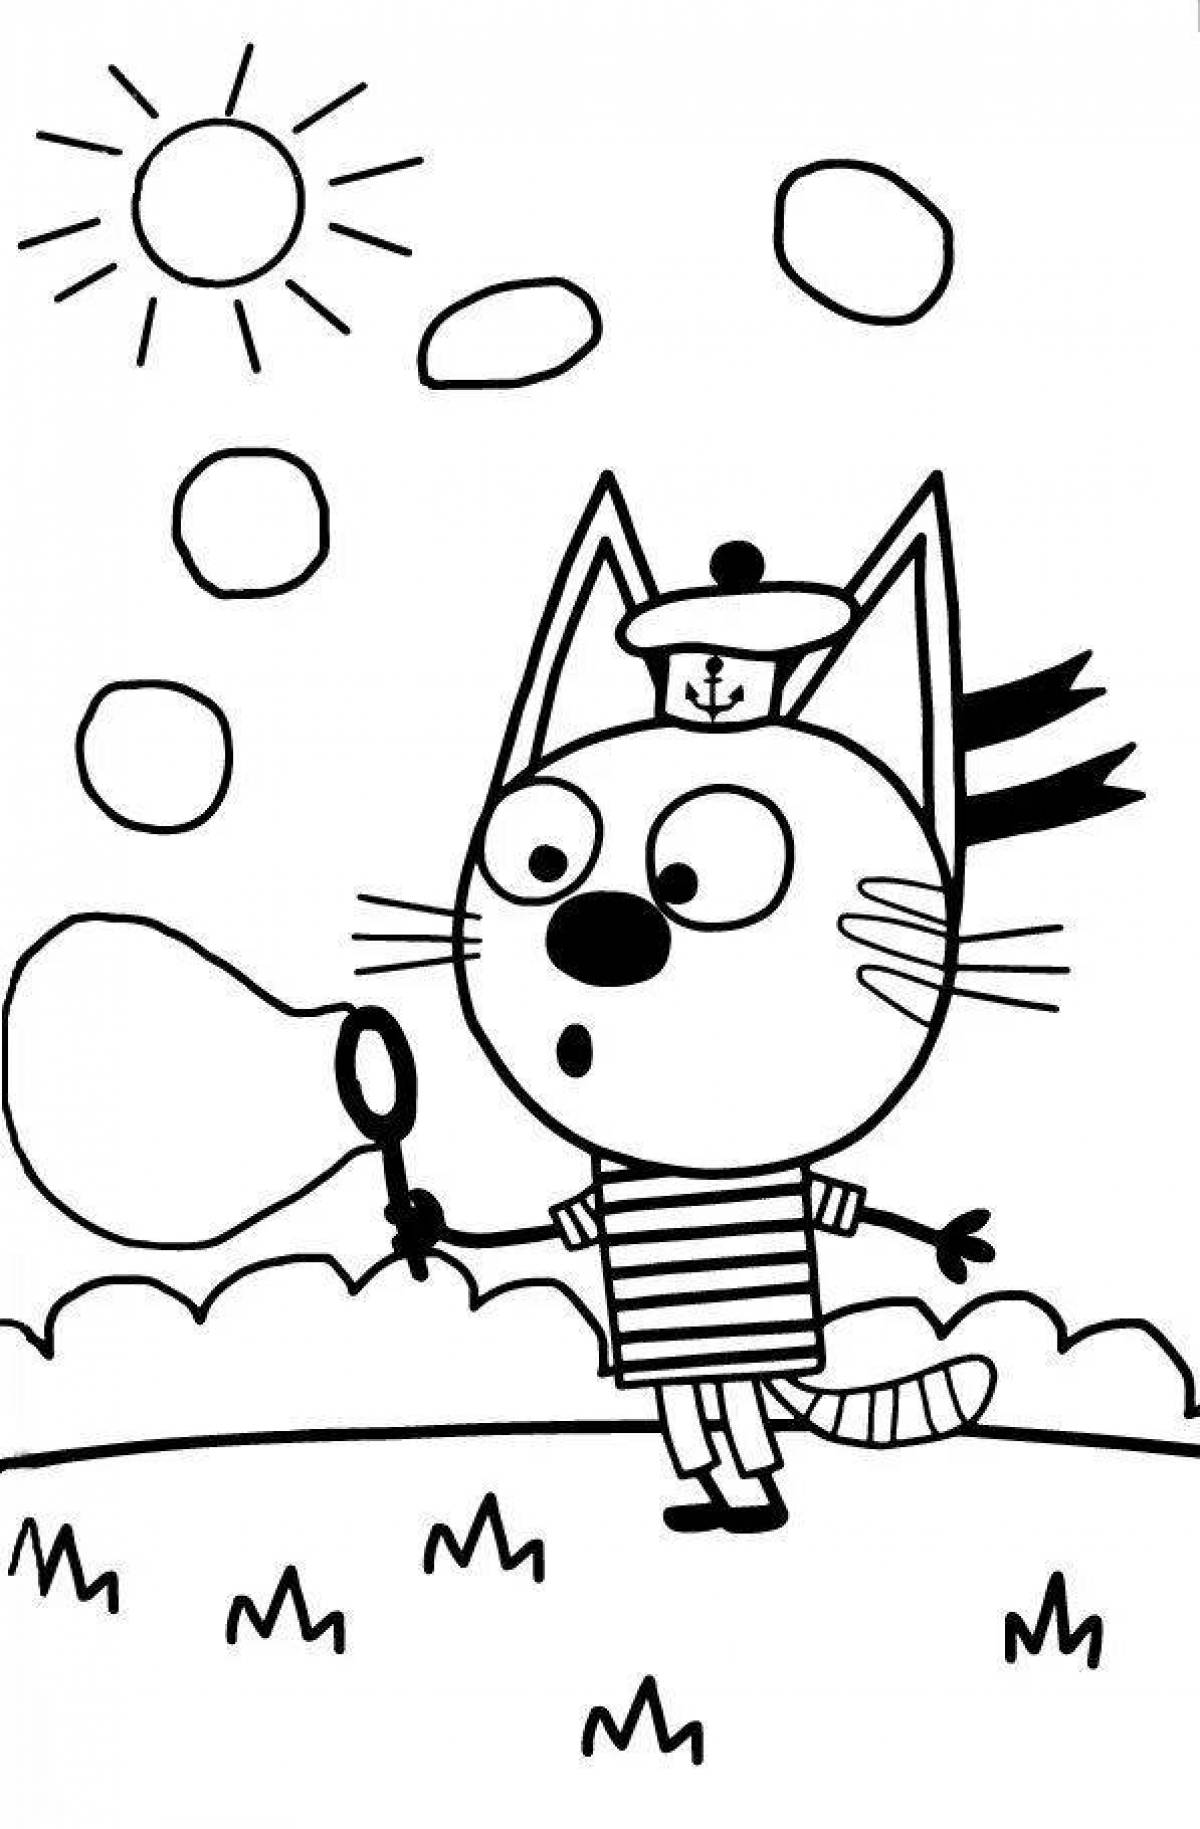 Three cats coloring page